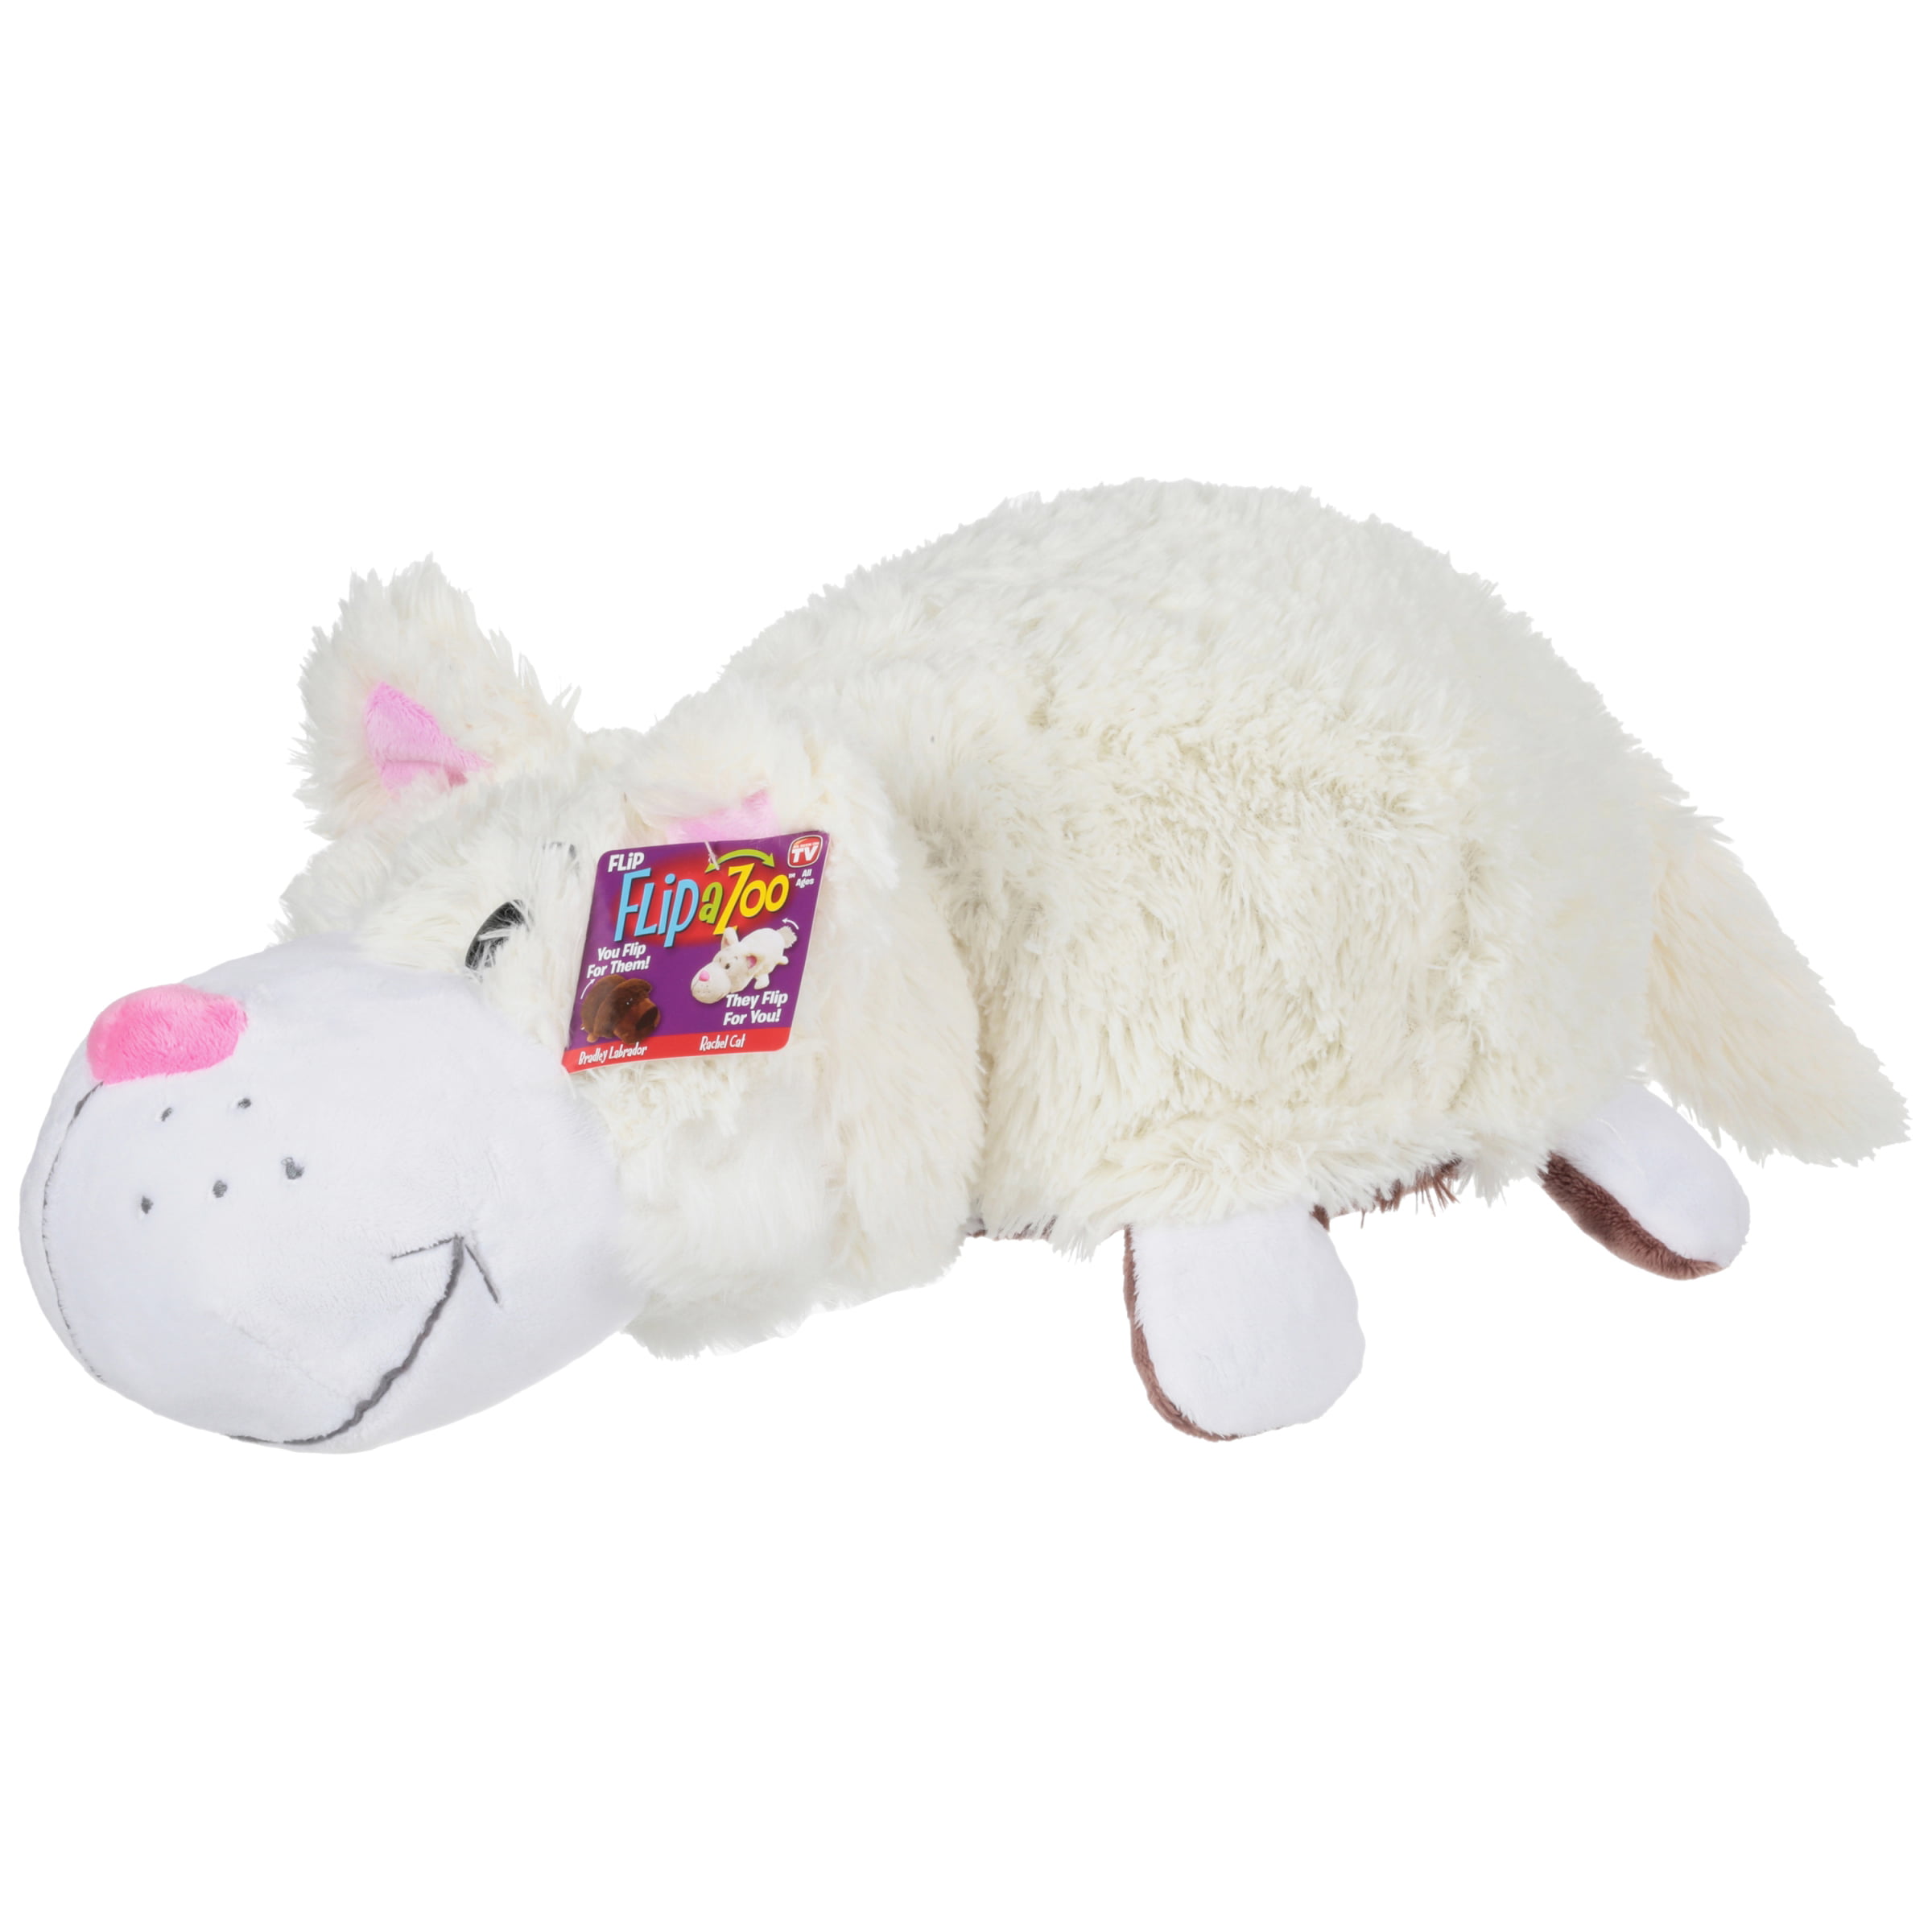 FlipaZoo 16inch Plush 2in1 Pillow Chocolate Labrador Transforming to White Cat for sale online 